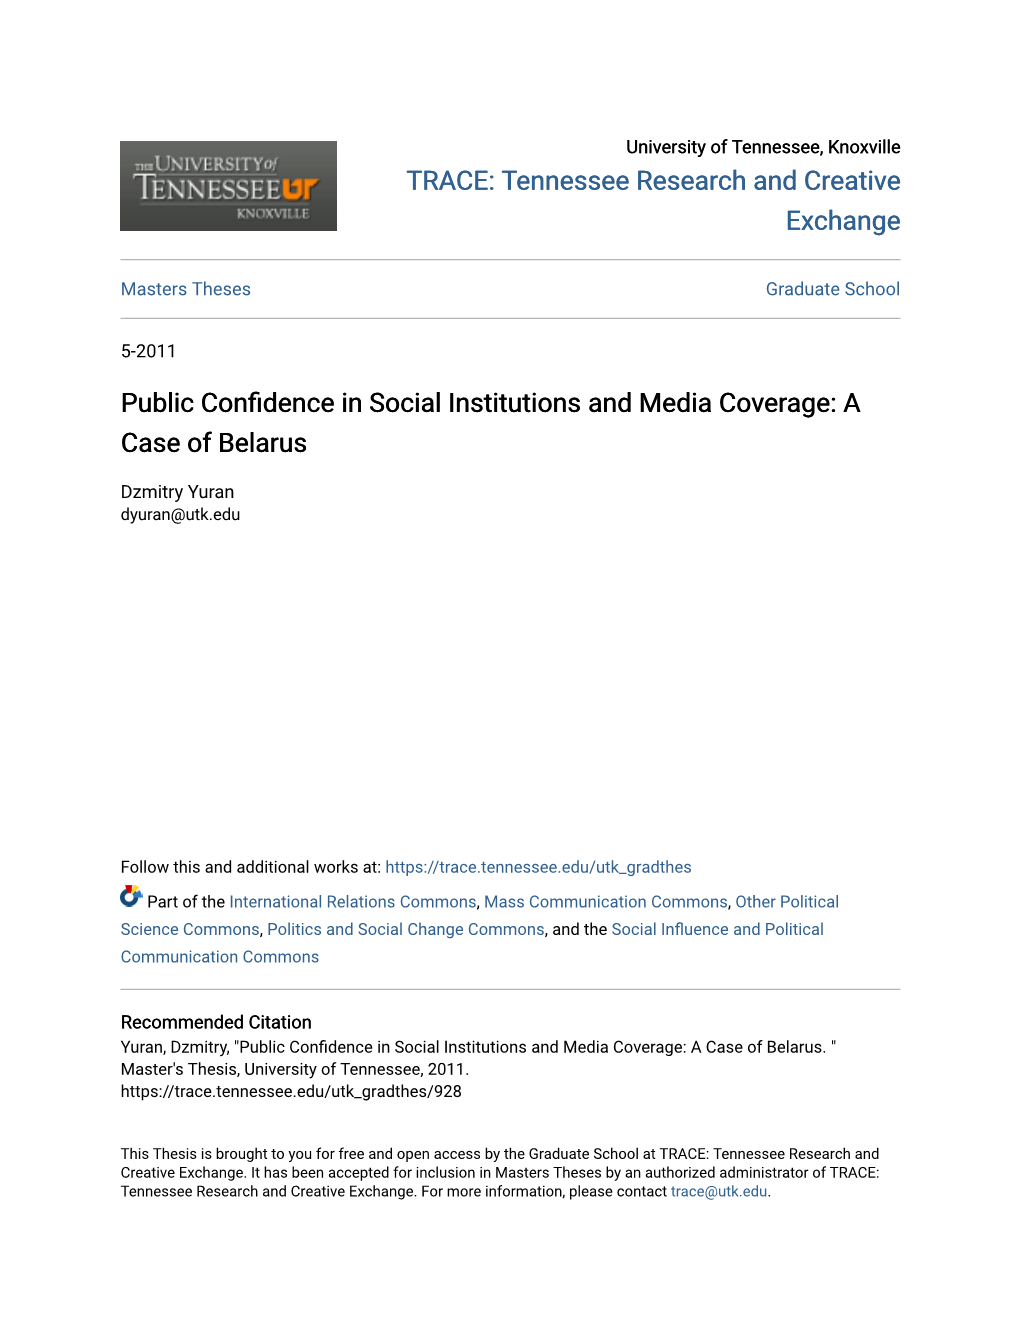 Public Confidence in Social Institutions and Media Coverage: a Case of Belarus